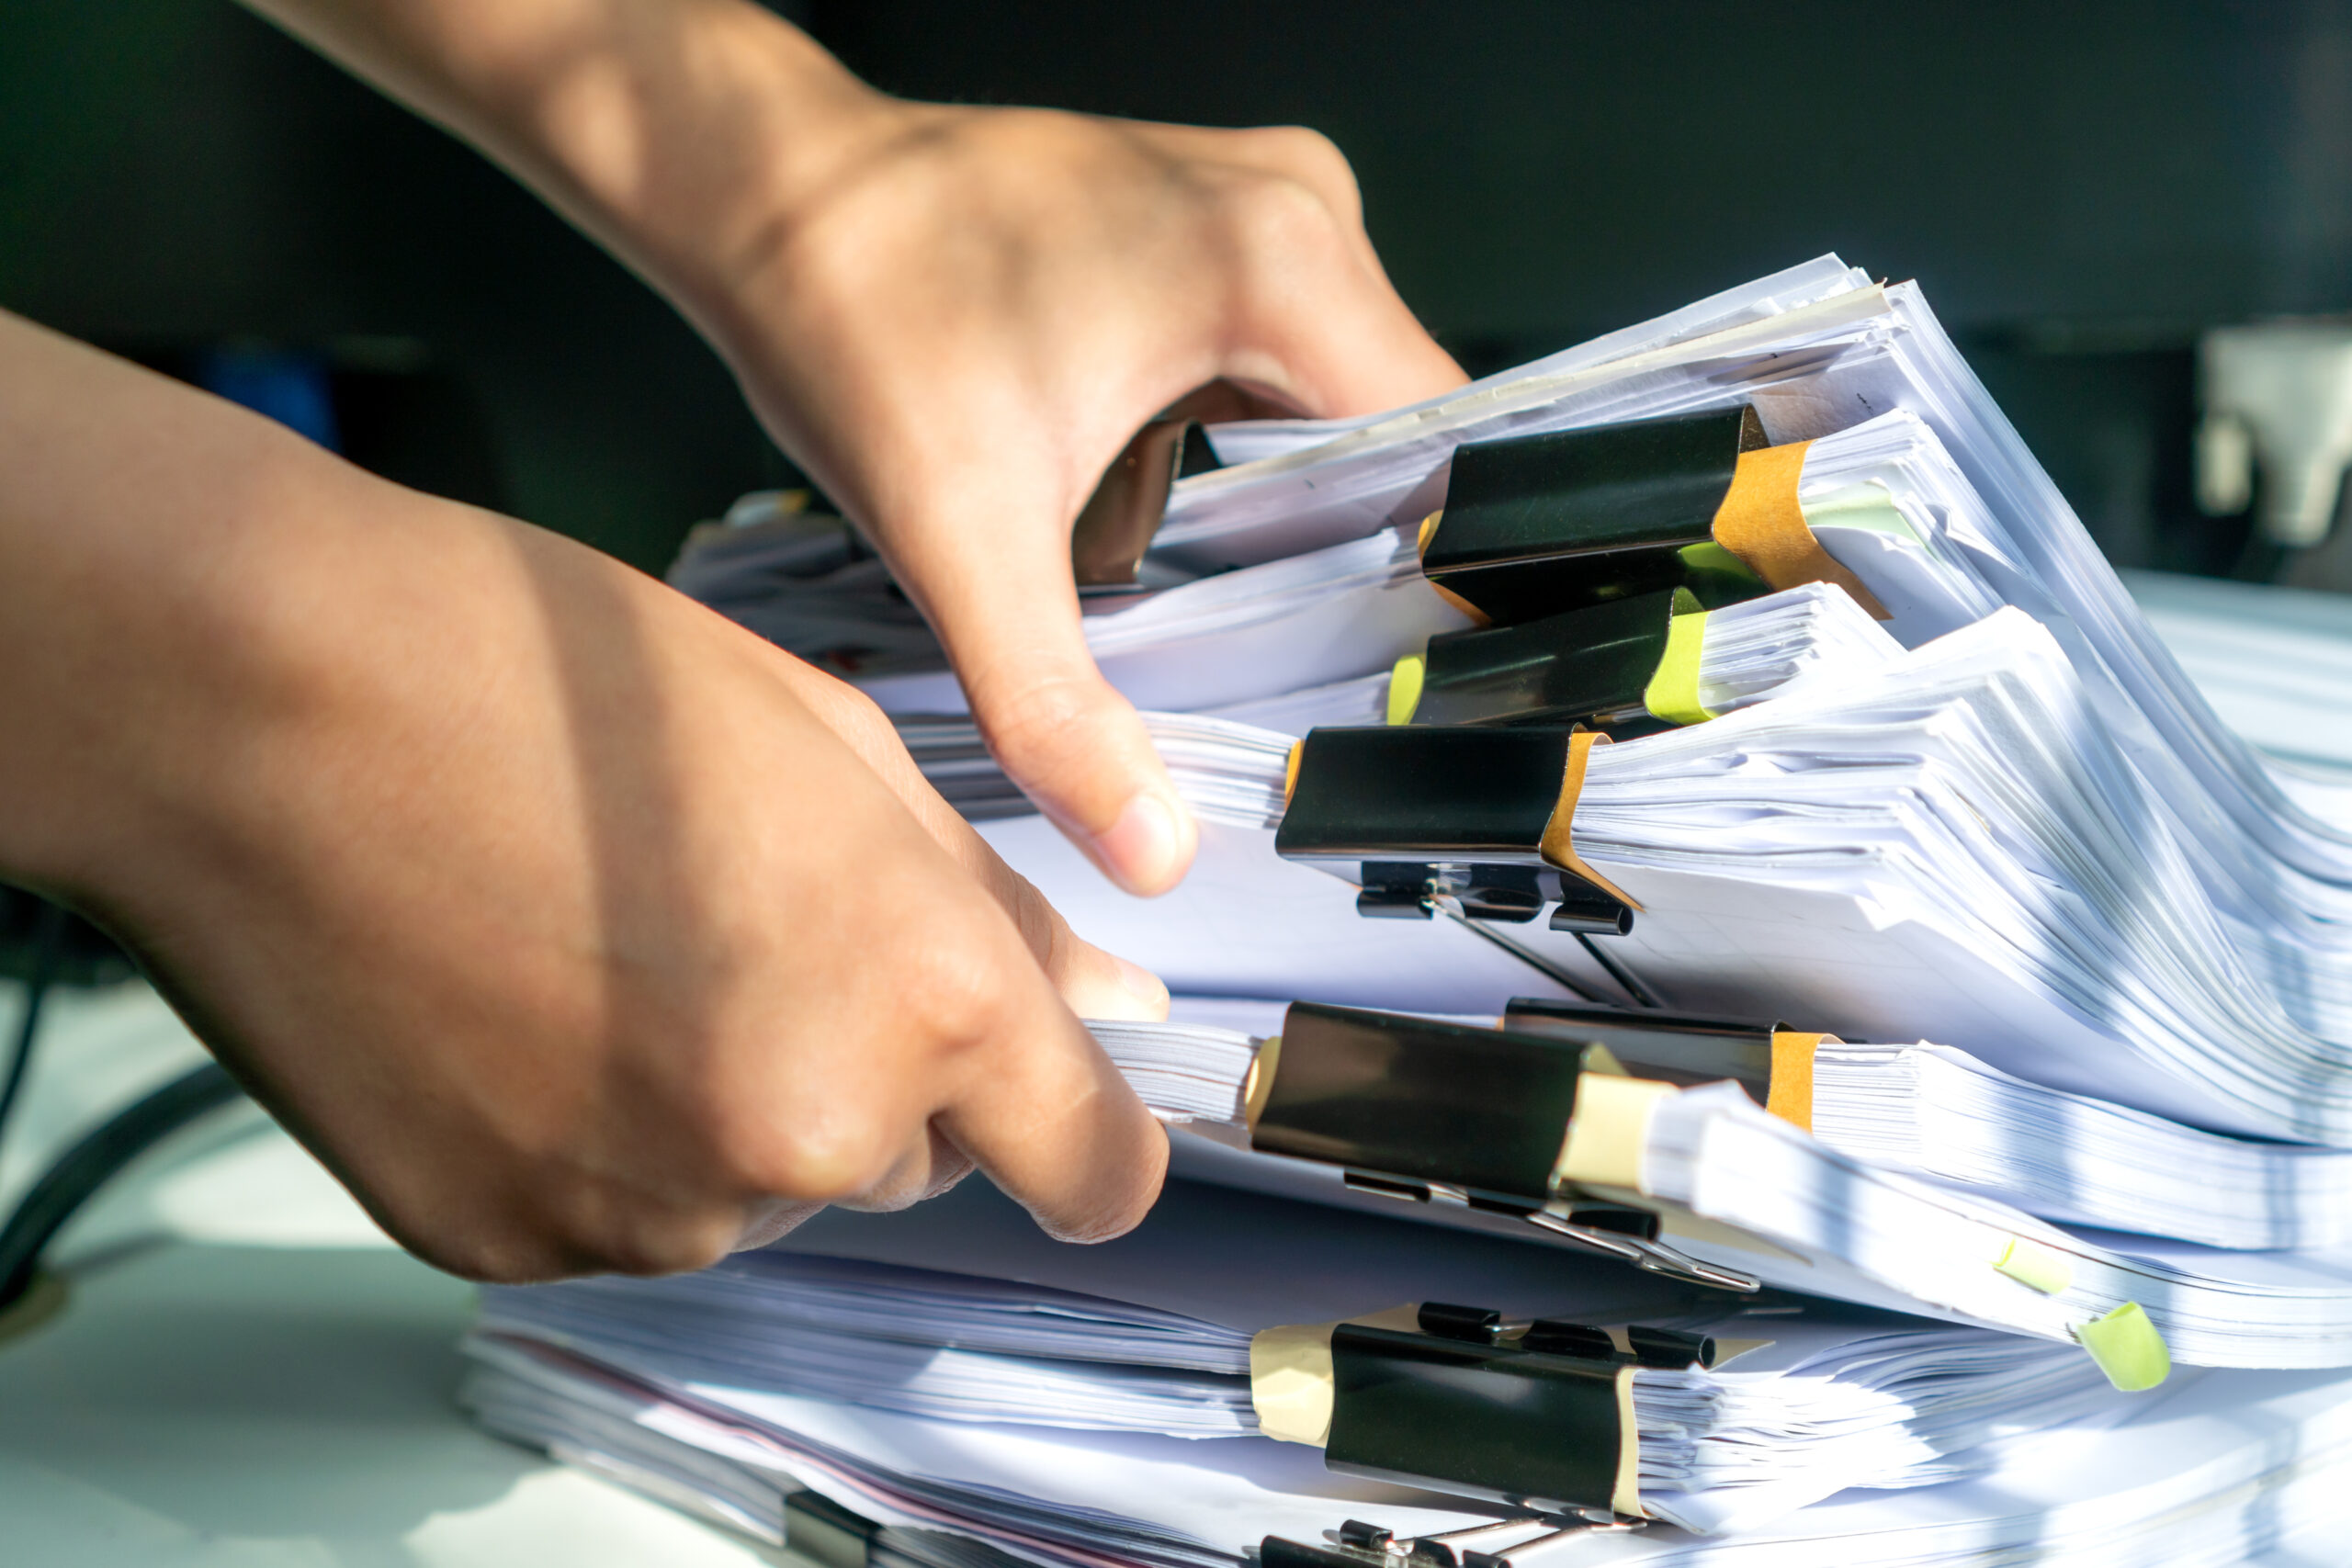 Woman holding stacks of paper evidence and reports organized with color-coding and binder clips